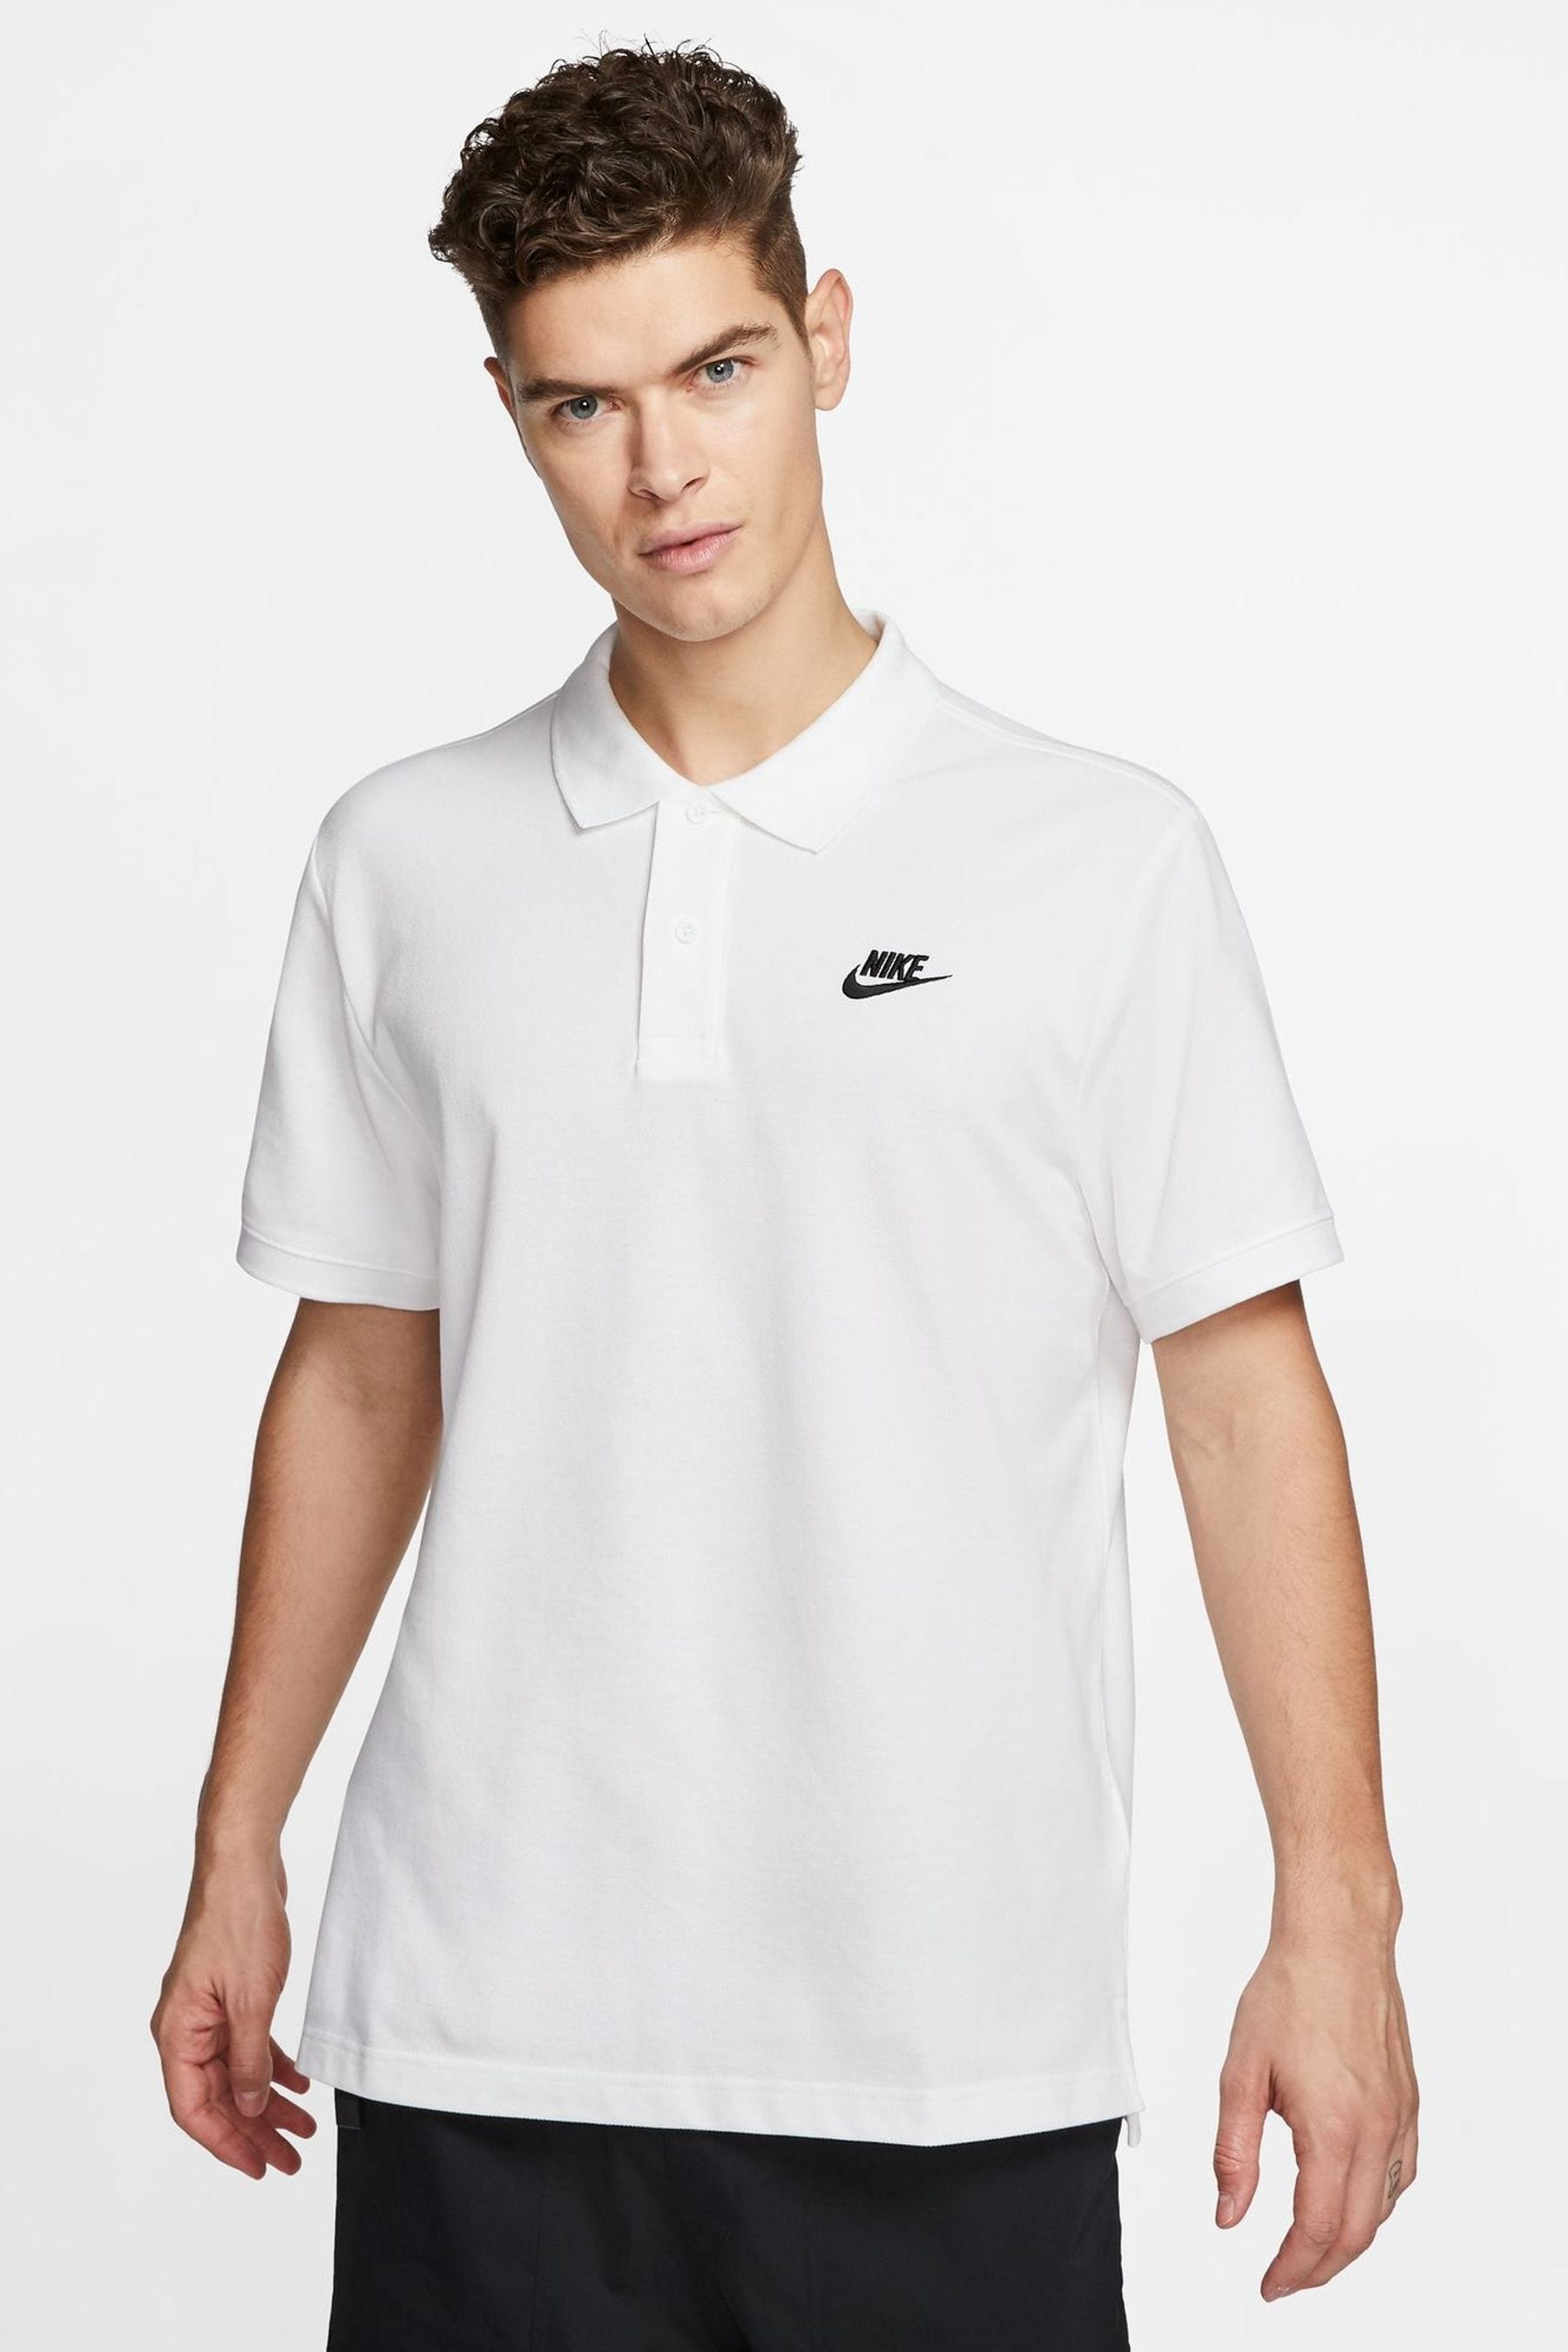 Buy Nike White Sportswear Polo from the Next UK online shop